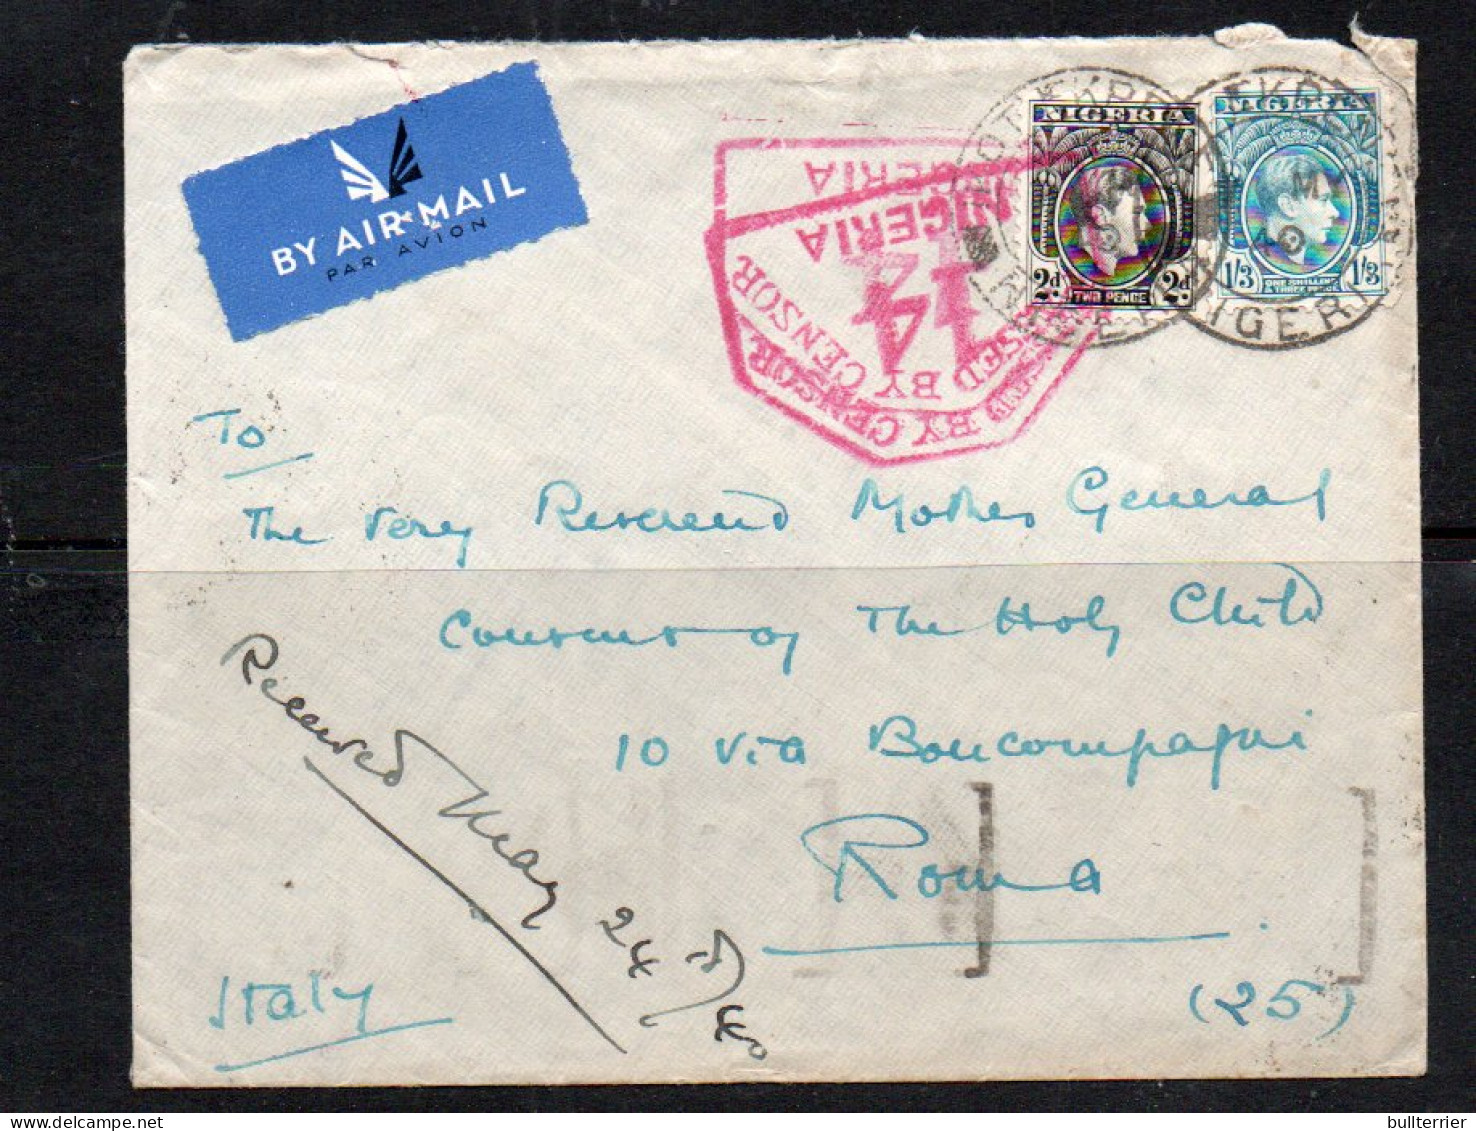 NIGERIA - 1940 - NIGERIA TO ITALY AIRMAIL COVER  WITH CENSOR  AND BACKSTAMPS  - Nigeria (...-1960)